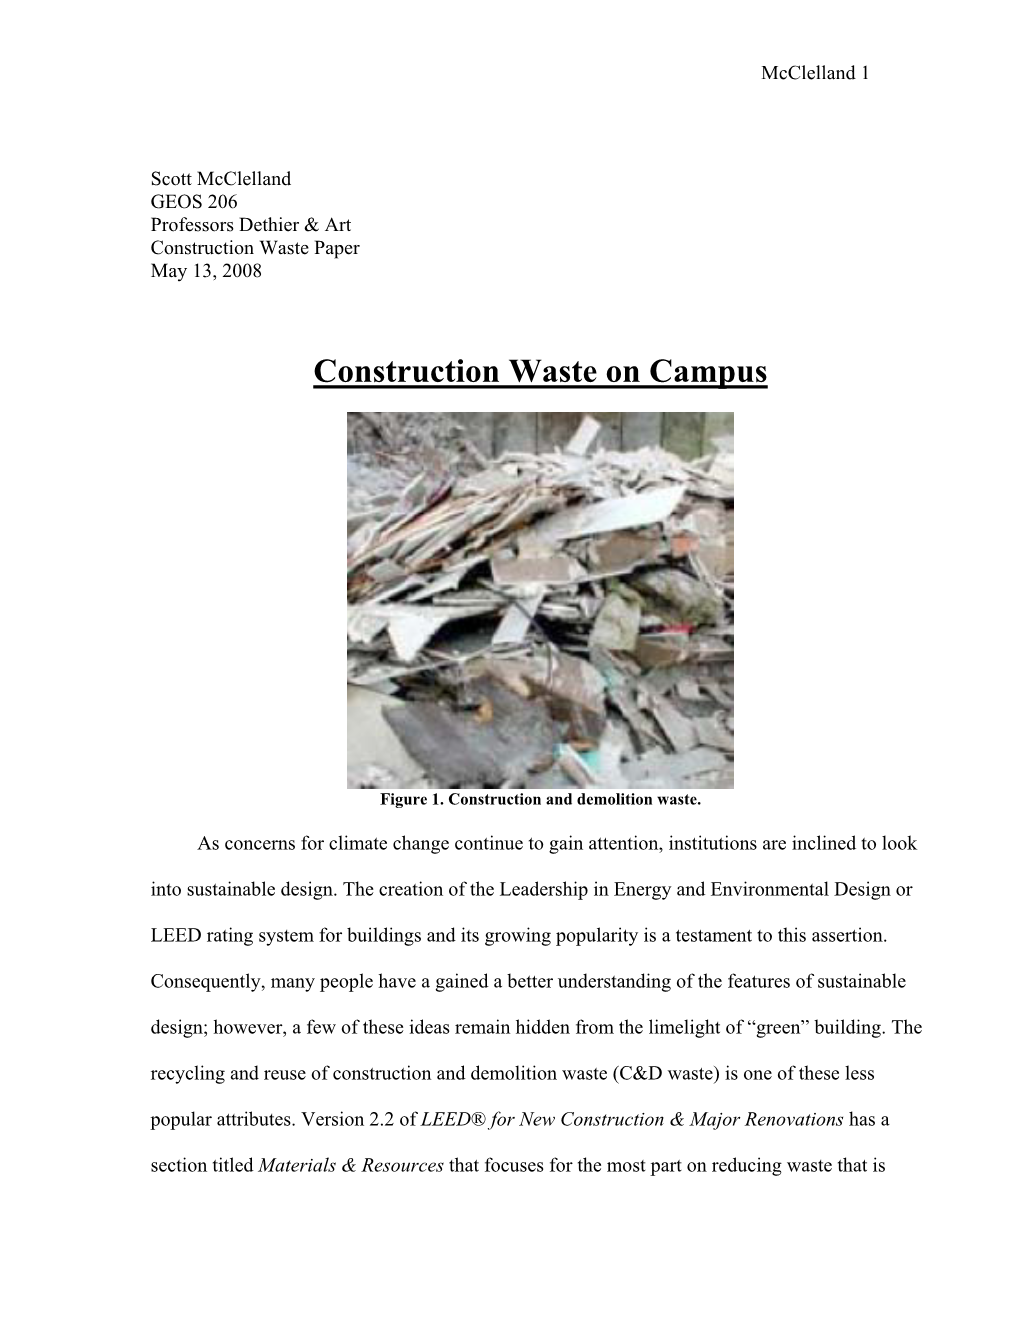 A History of Construction Waste Management on Campus-Barr And